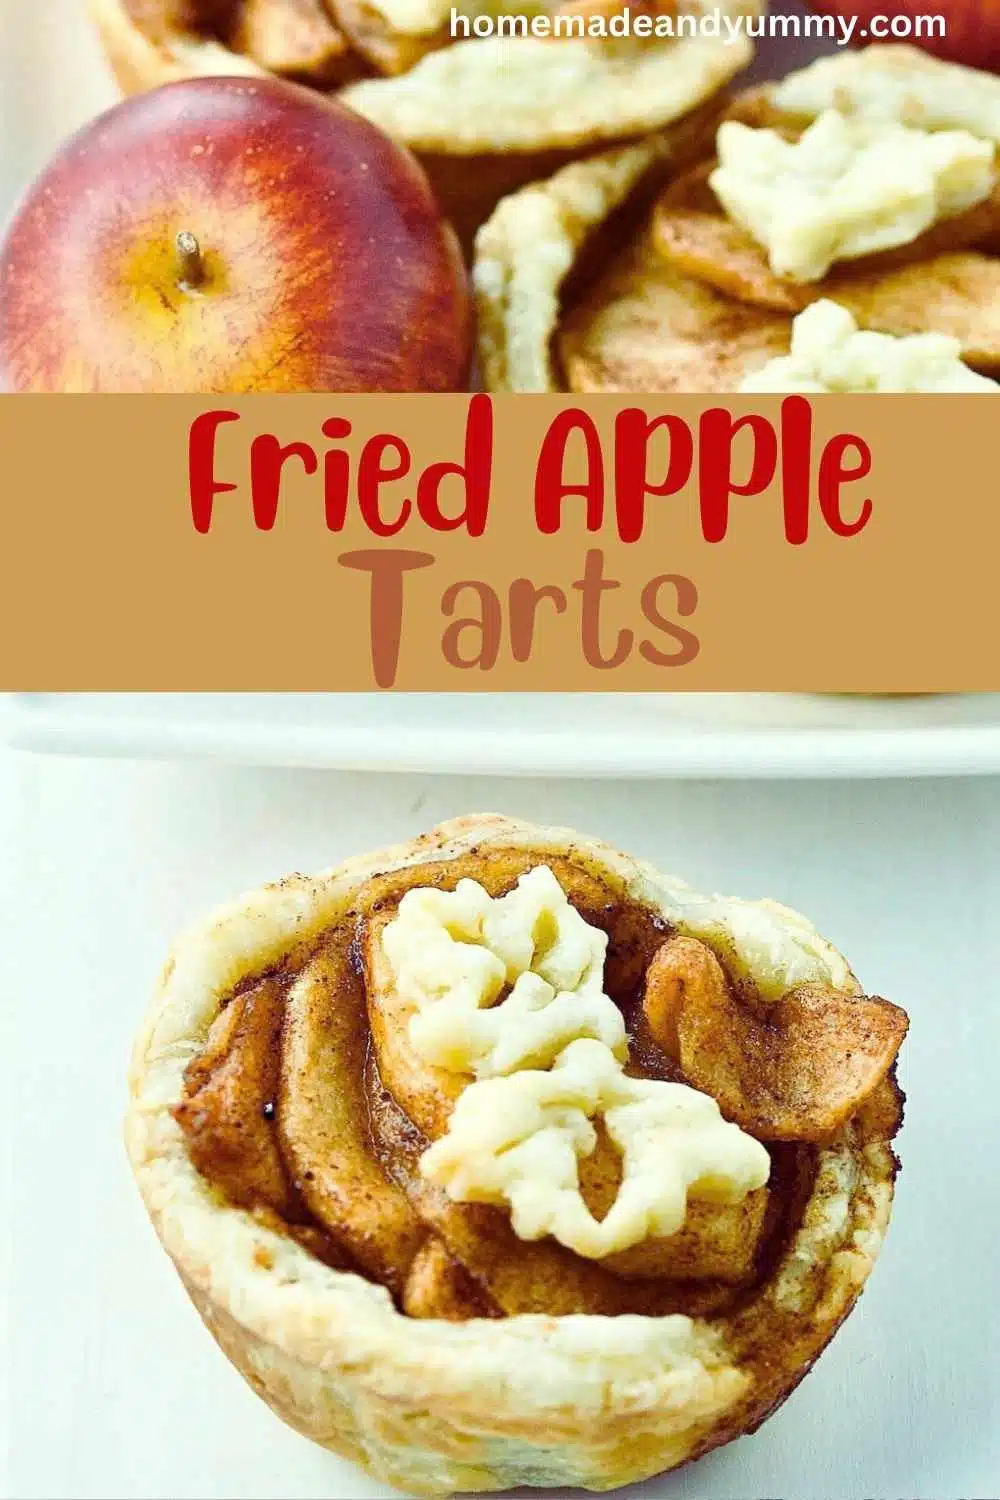 Puff Pastry Fried Apple Tarts pin image.